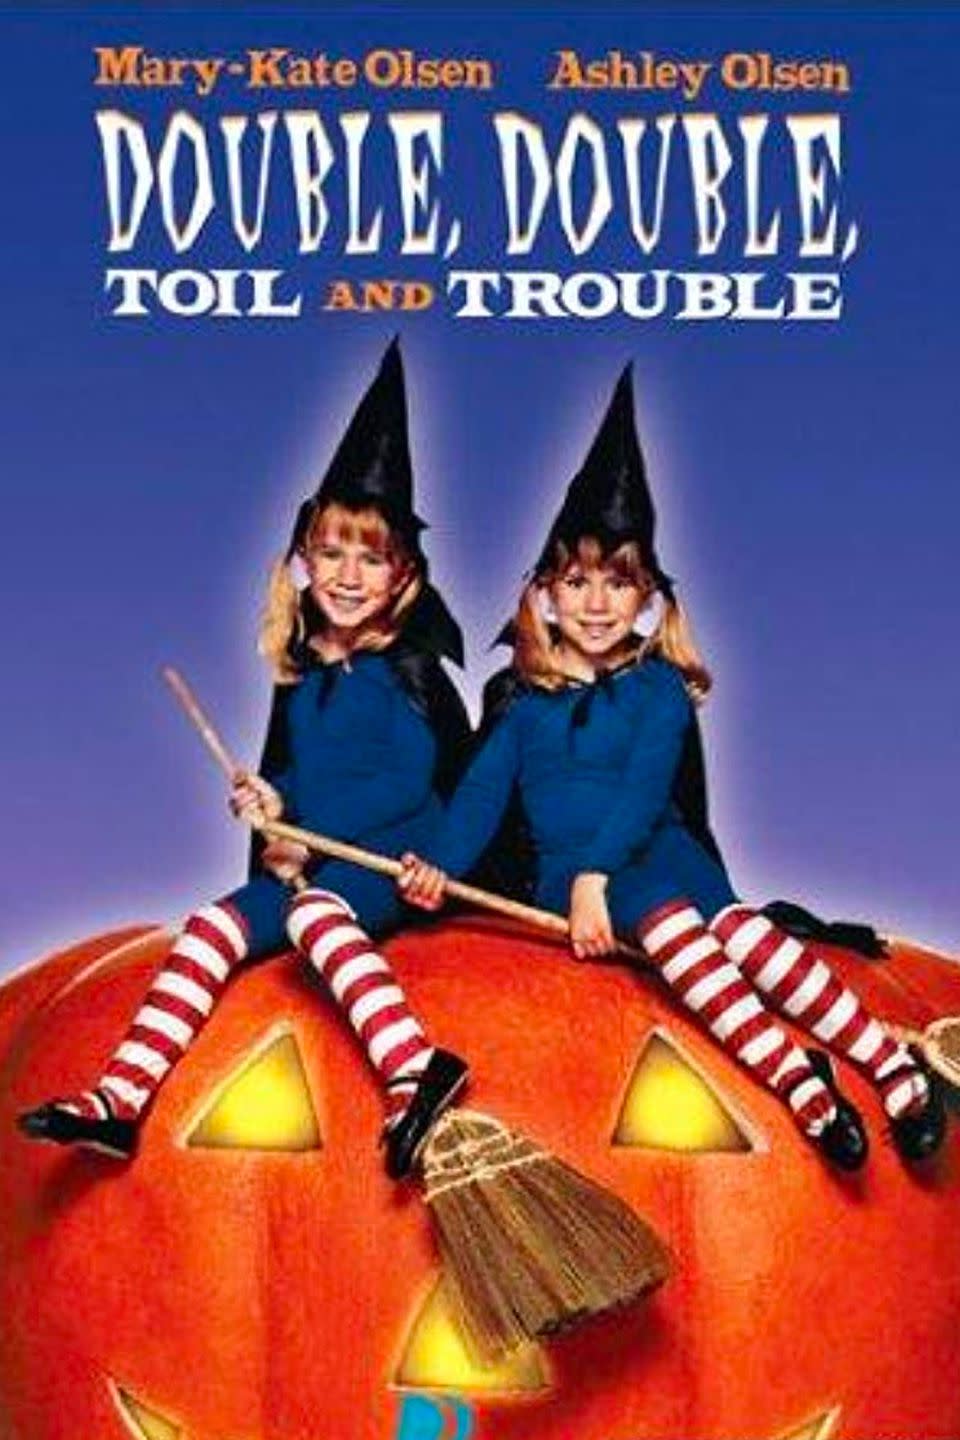 DOUBLE, DOUBLE TOIL AND TROUBLE